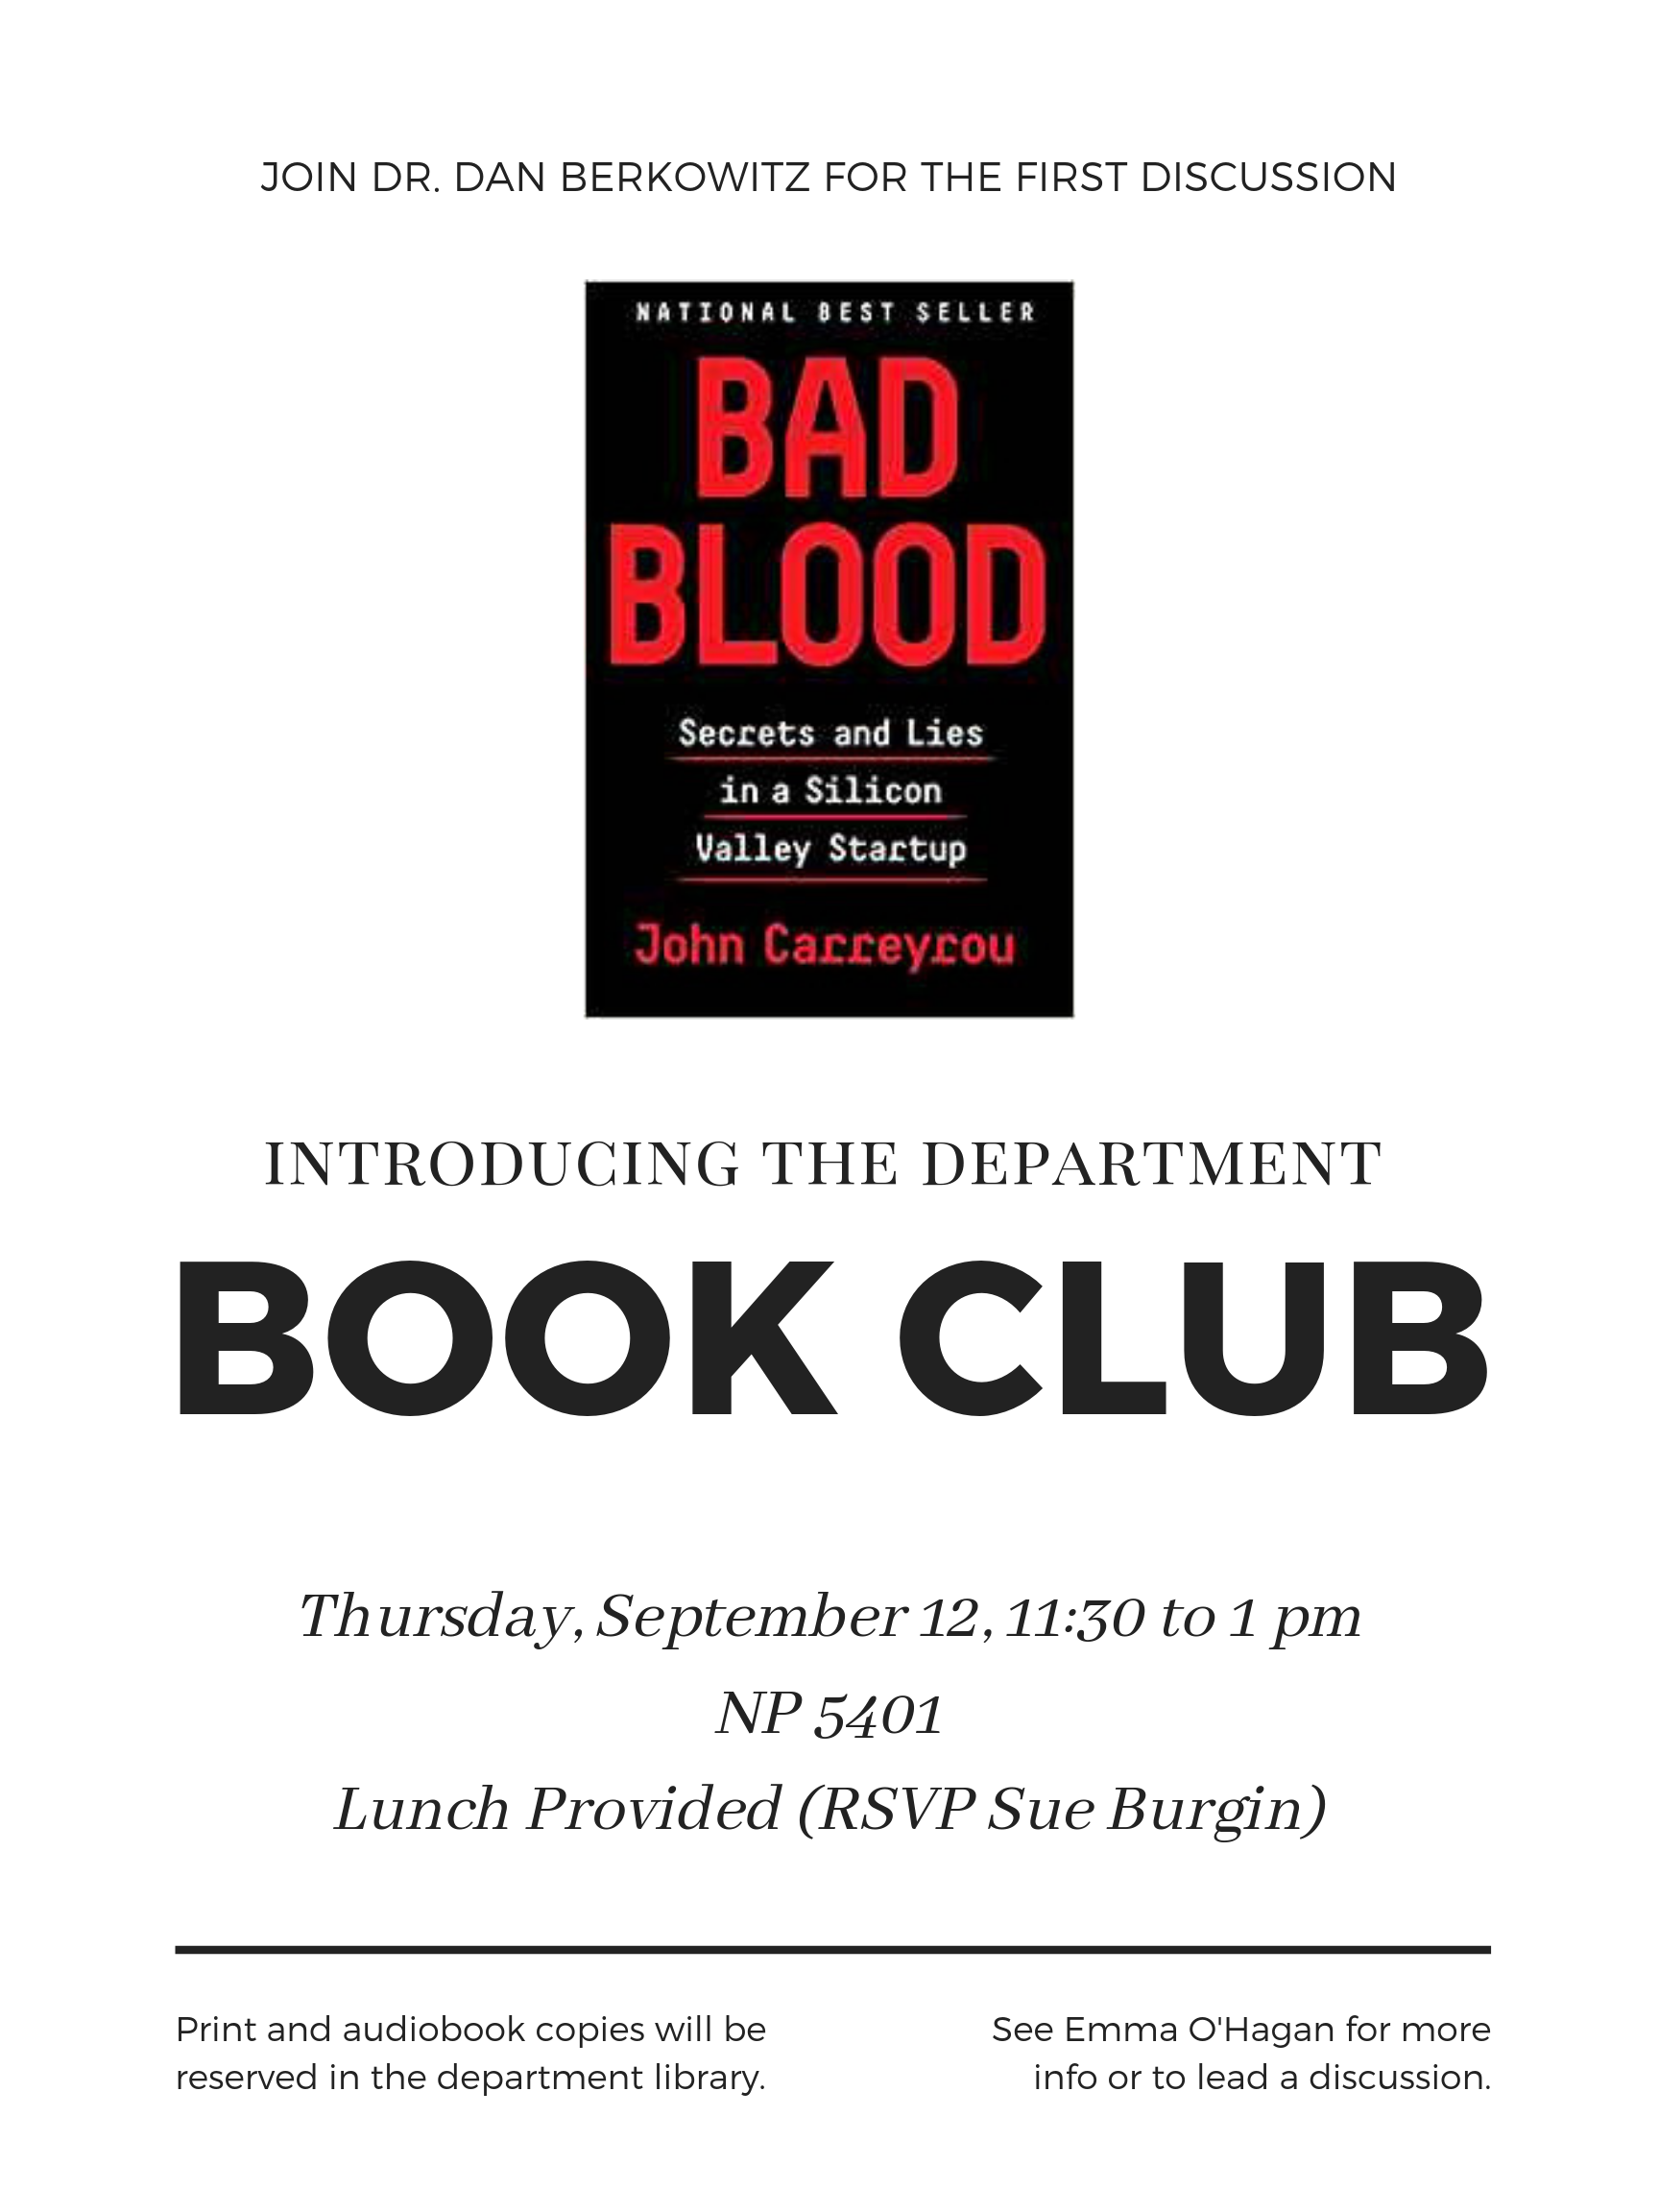 Introducing our department book club